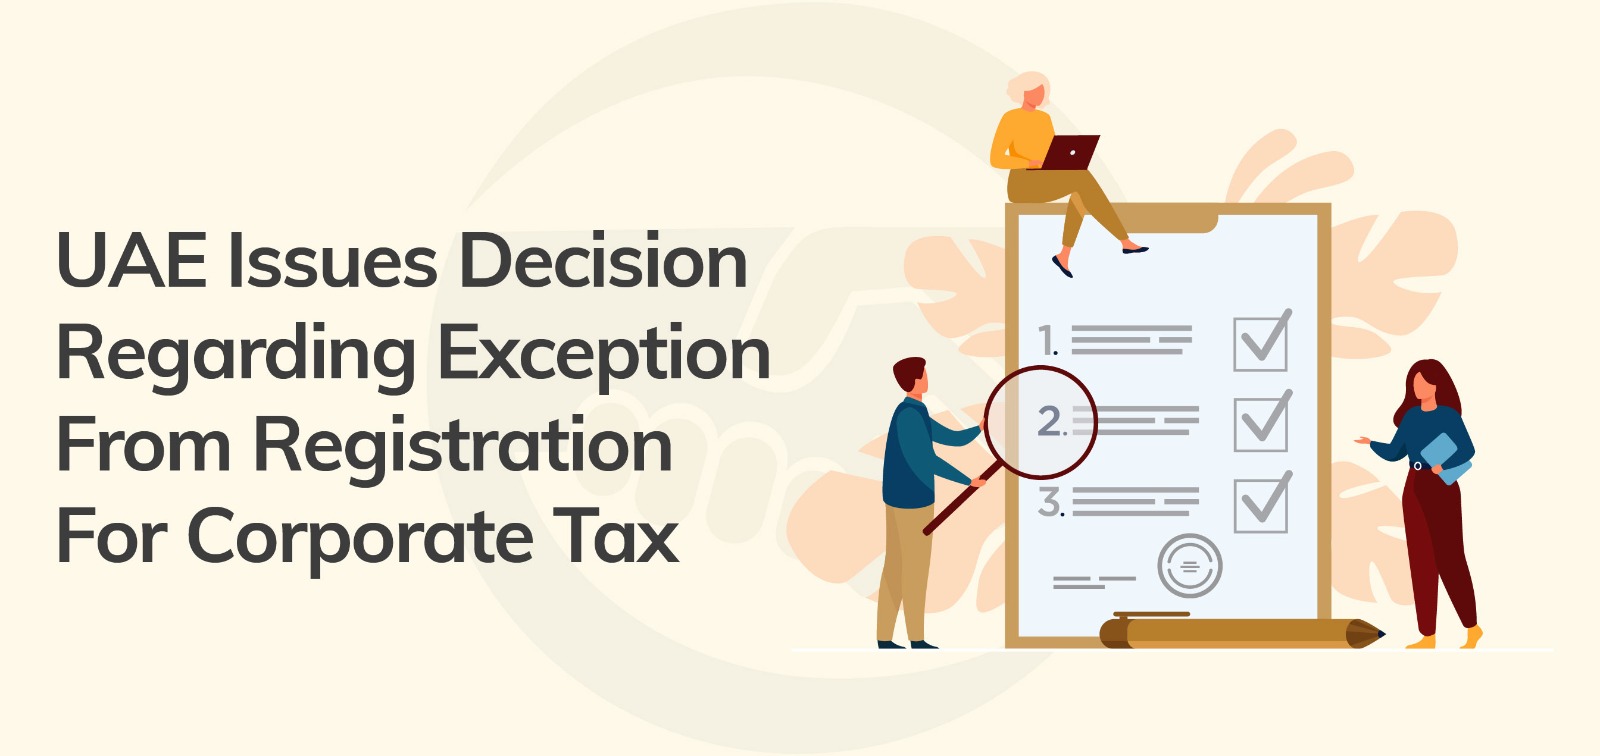 Ministry Of Finance Issues Decision On Exception From Registration For Corporate Tax